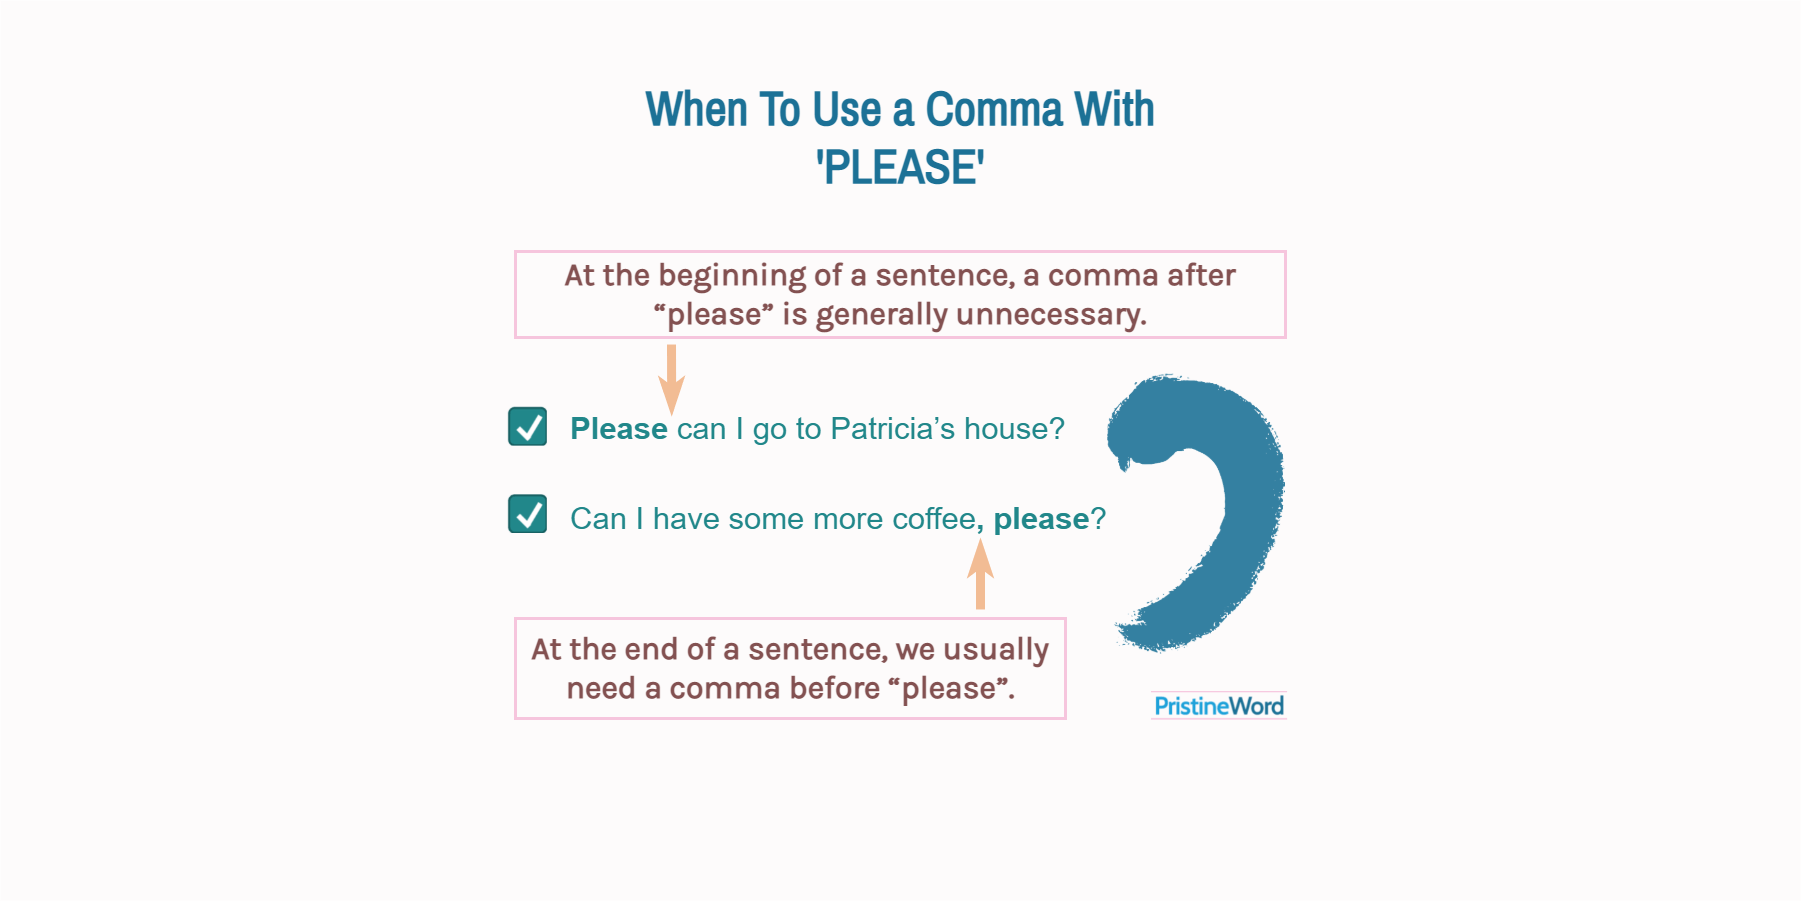 Do You Need a Comma With 'PLEASE'?